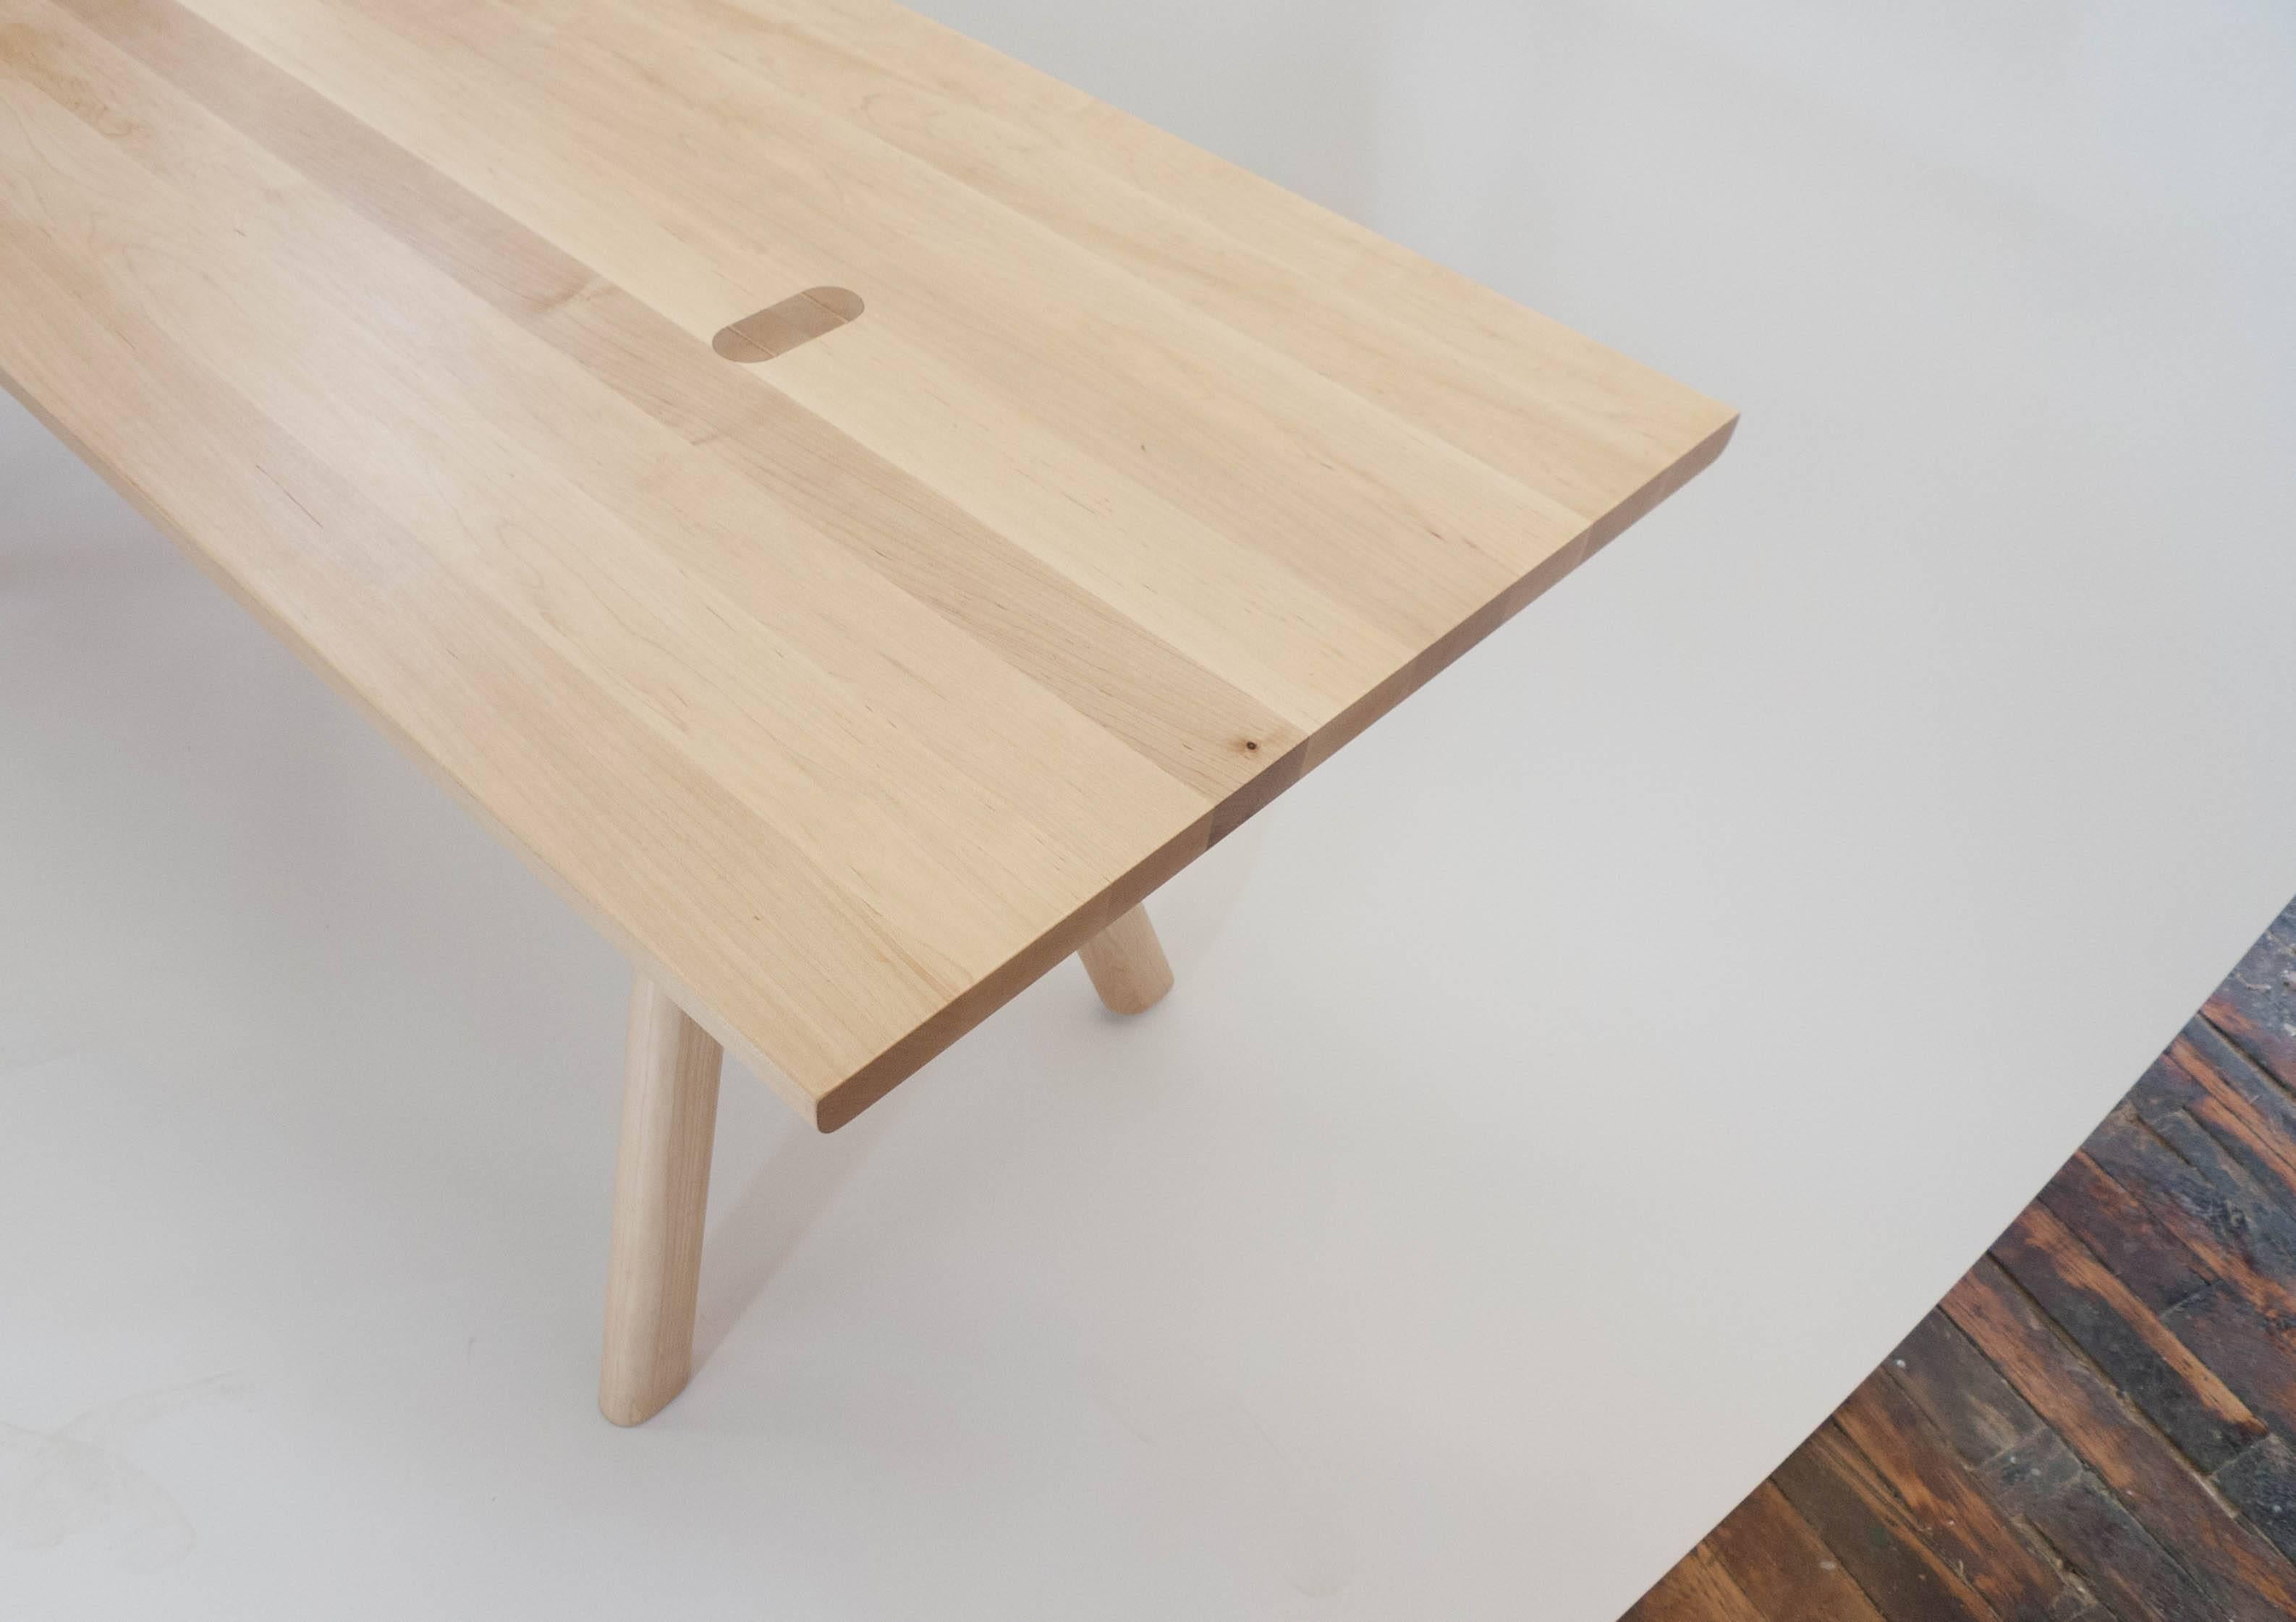 The Watney dining table is built by hand in our Brooklyn studio from premium hardwoods. The parred down silhouette showcases the exposed through tenons in the solid wood top. The size can be expanded or adapted to fit a wide variety of spaces.
Shown